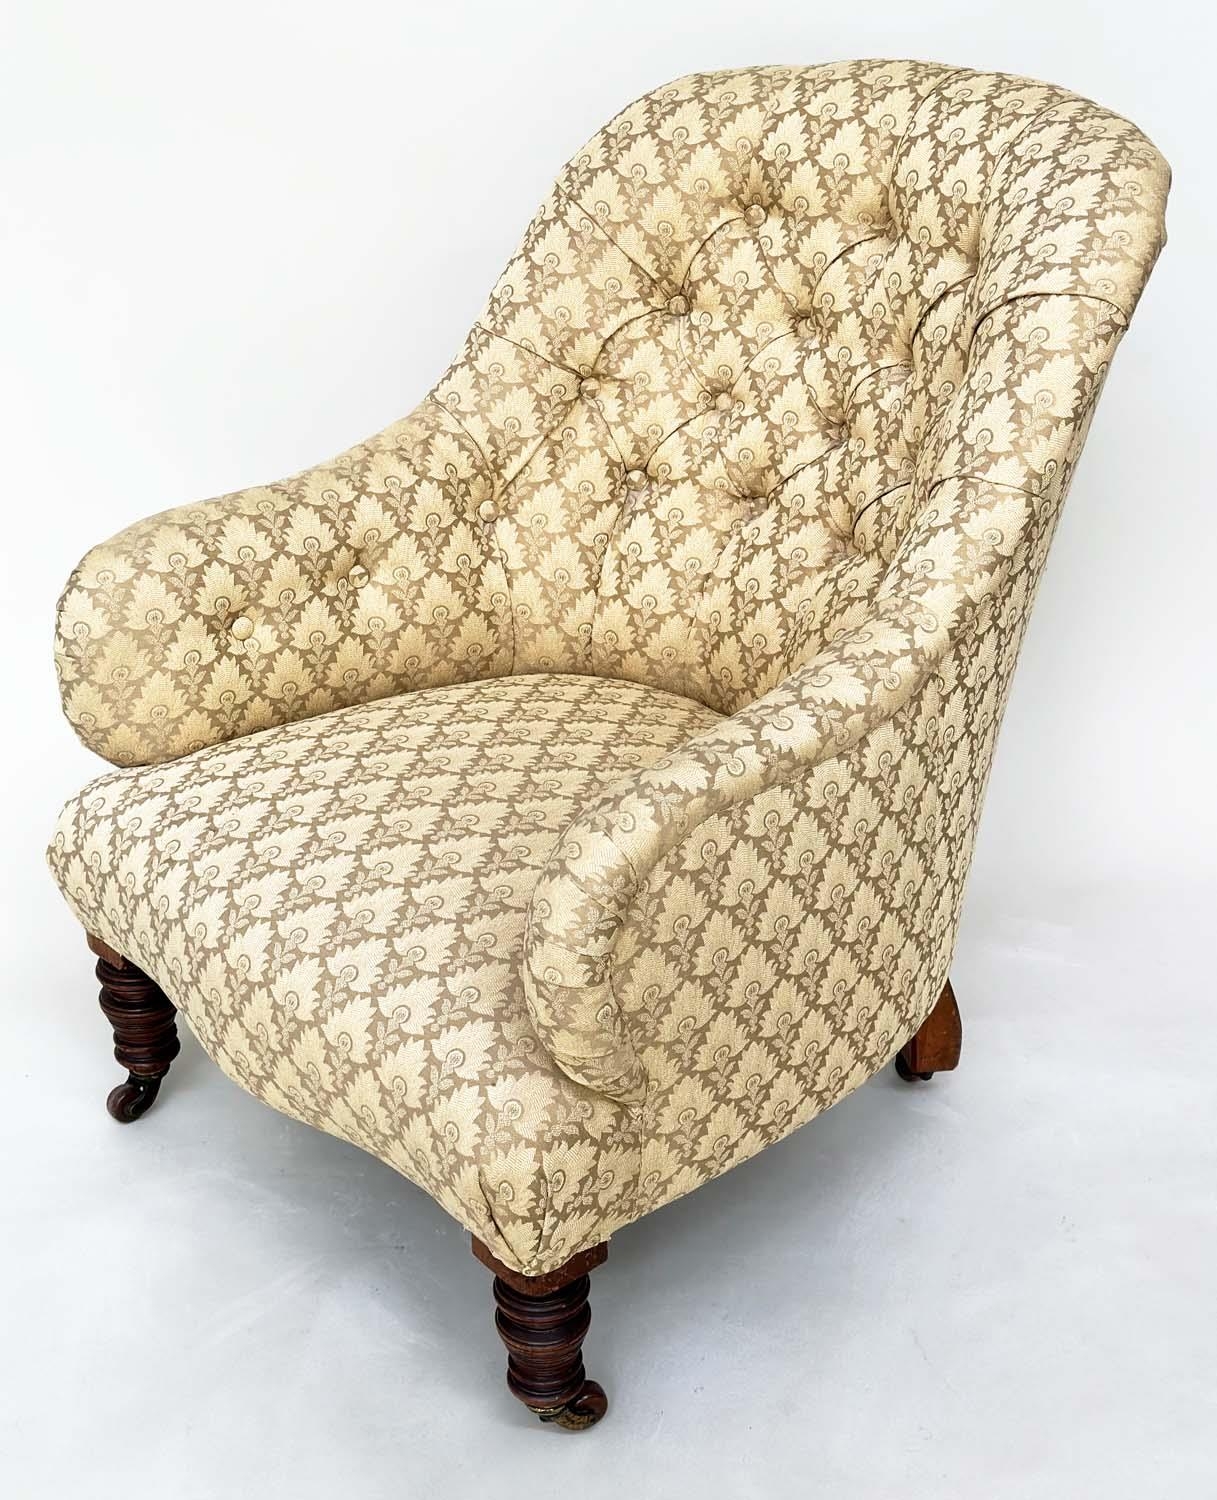 SLIPPER ARMCHAIR, 19th century walnut with two tone maple leaf print upholstery, 85cm H. - Image 8 of 10